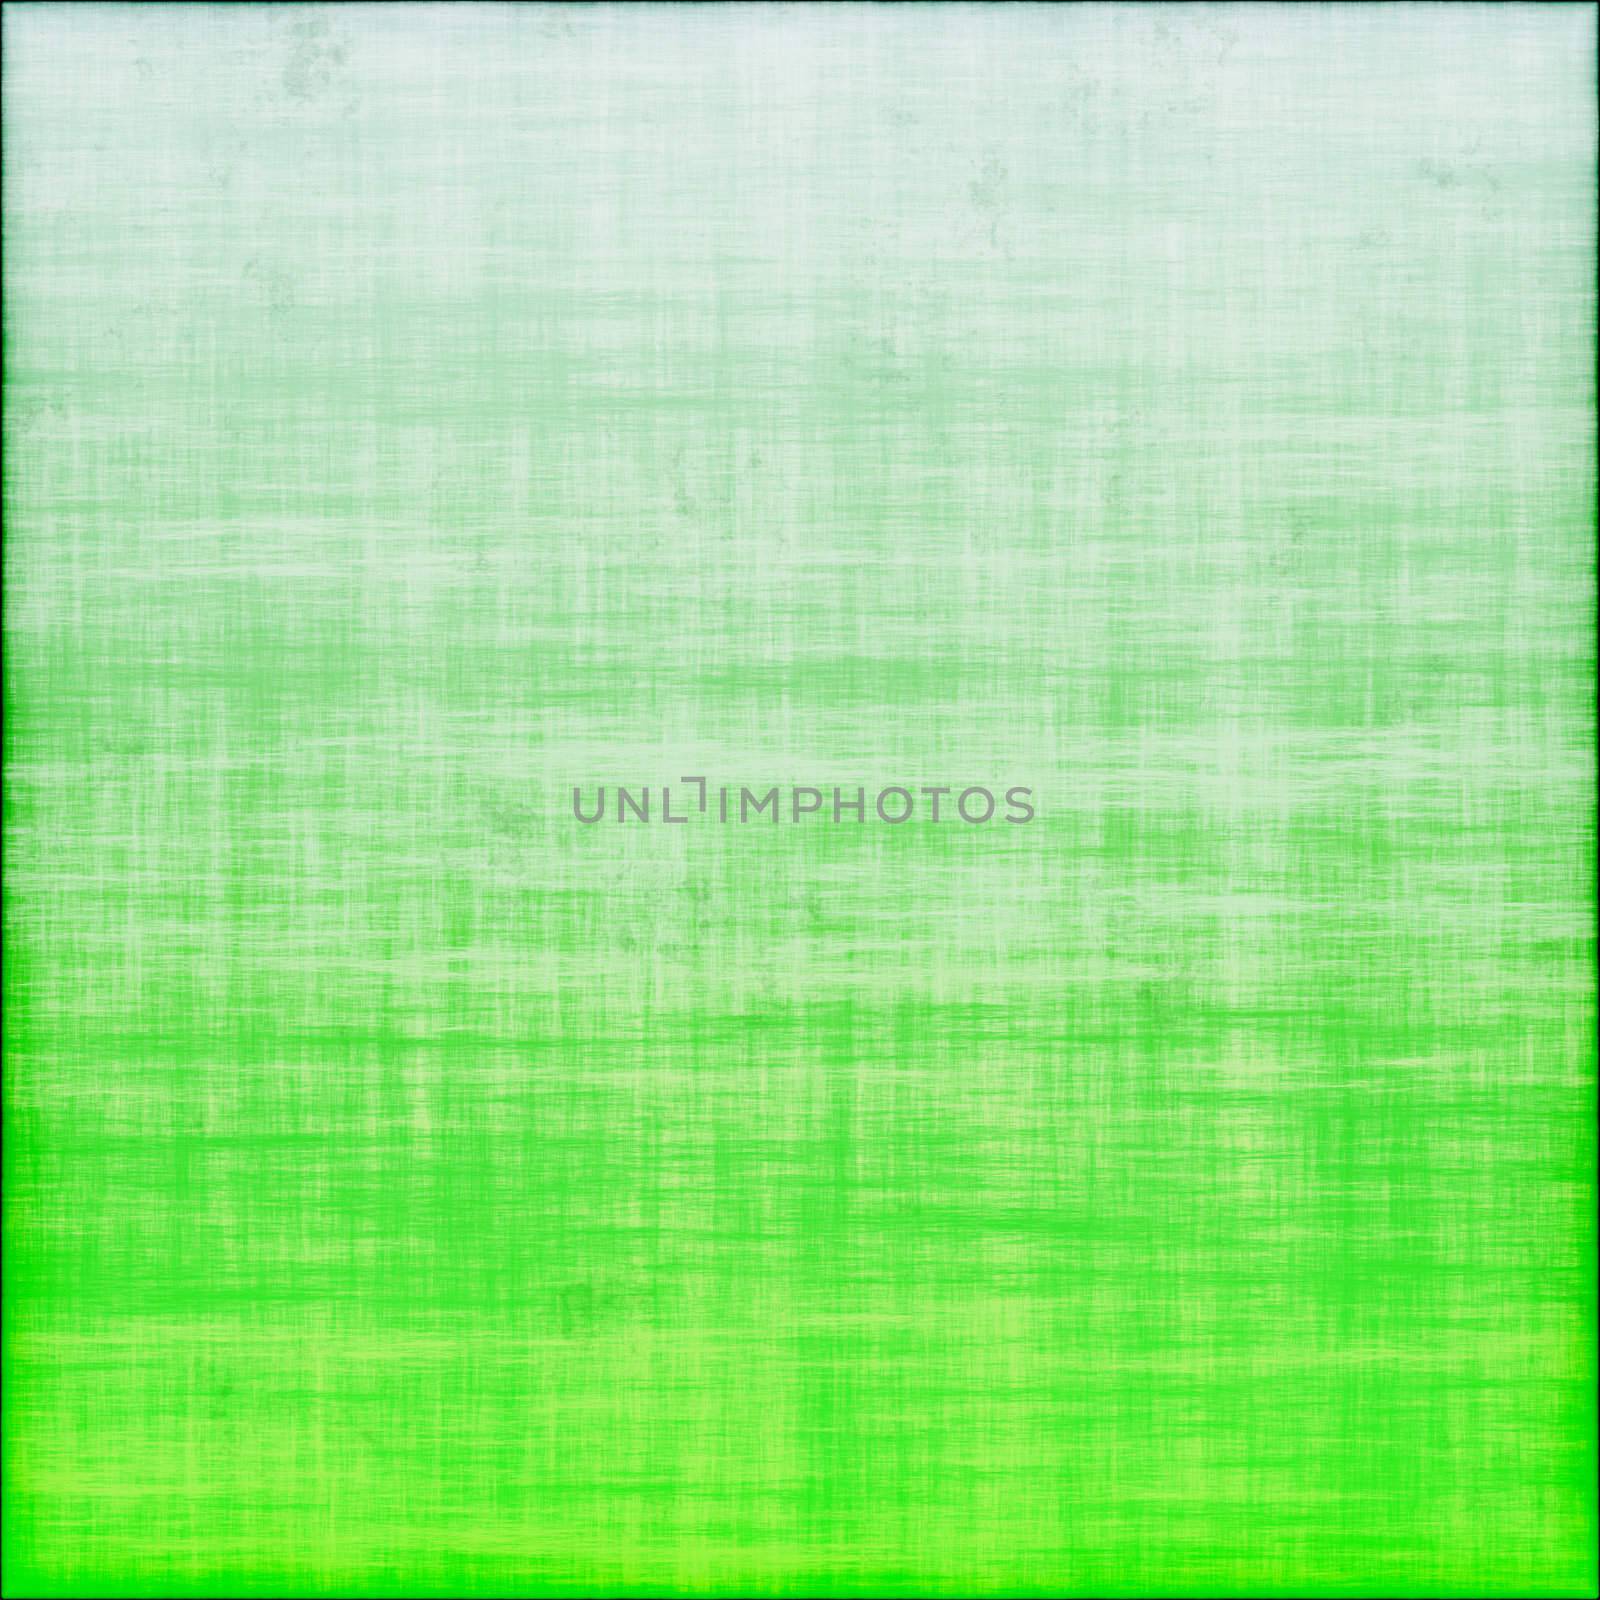 Grunge background in green color